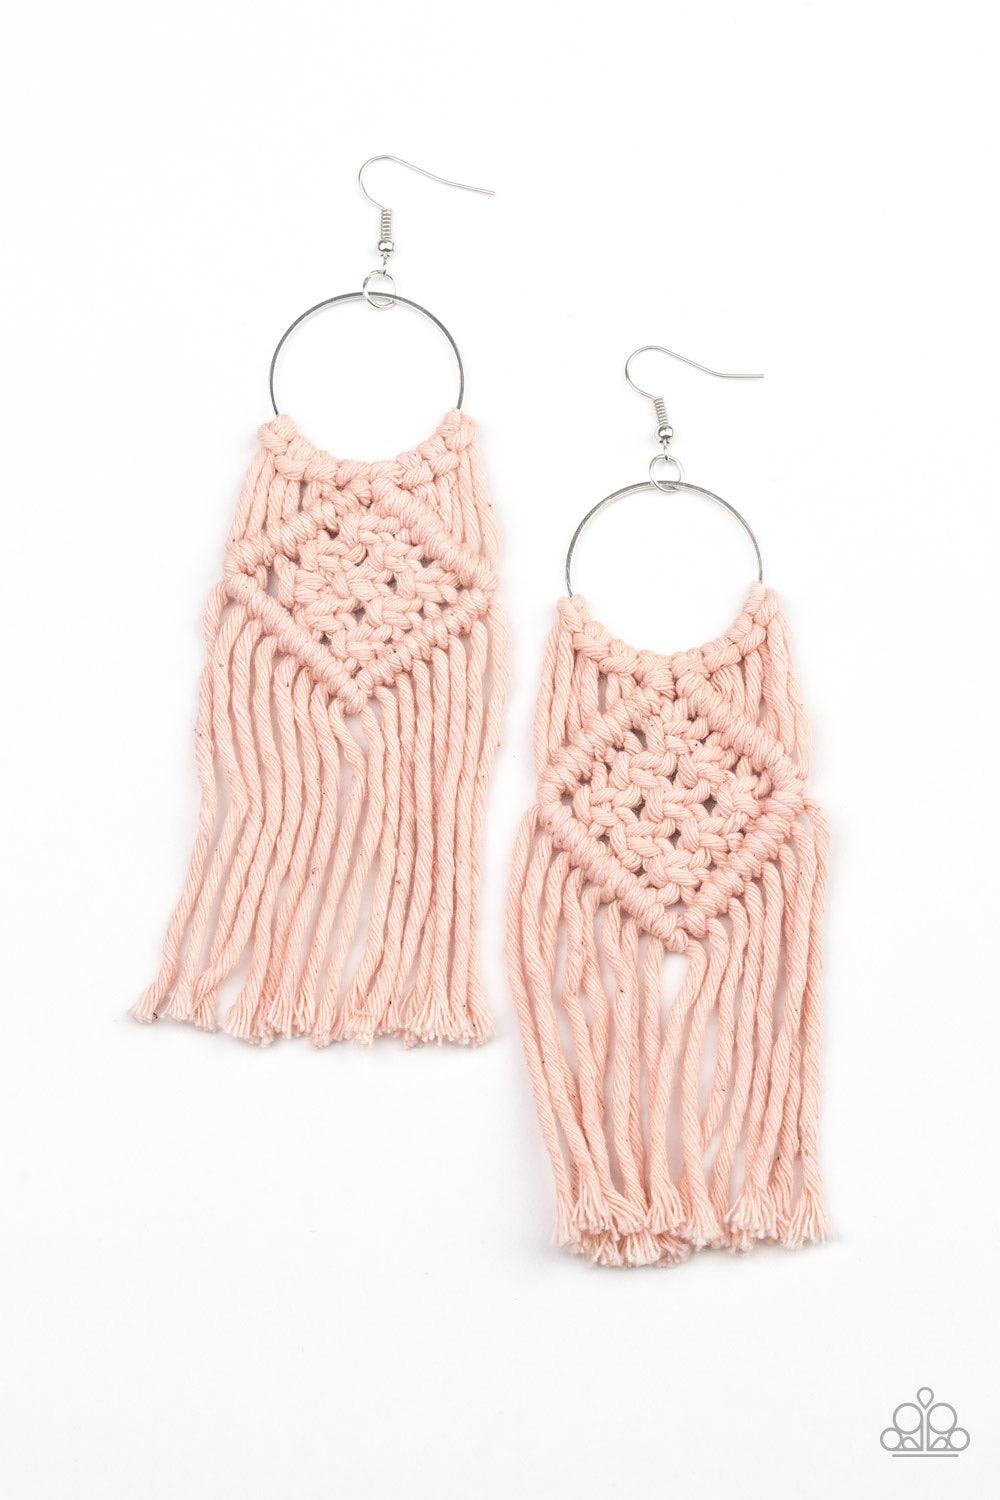 Paparazzi Accessories Macrame Rainbow - Pink Soft pink cording knots around the bottom of a dainty silver hoop, weaving into a colorful macrame fringe. Earring attaches to a standard fishhook fitting. Jewelry